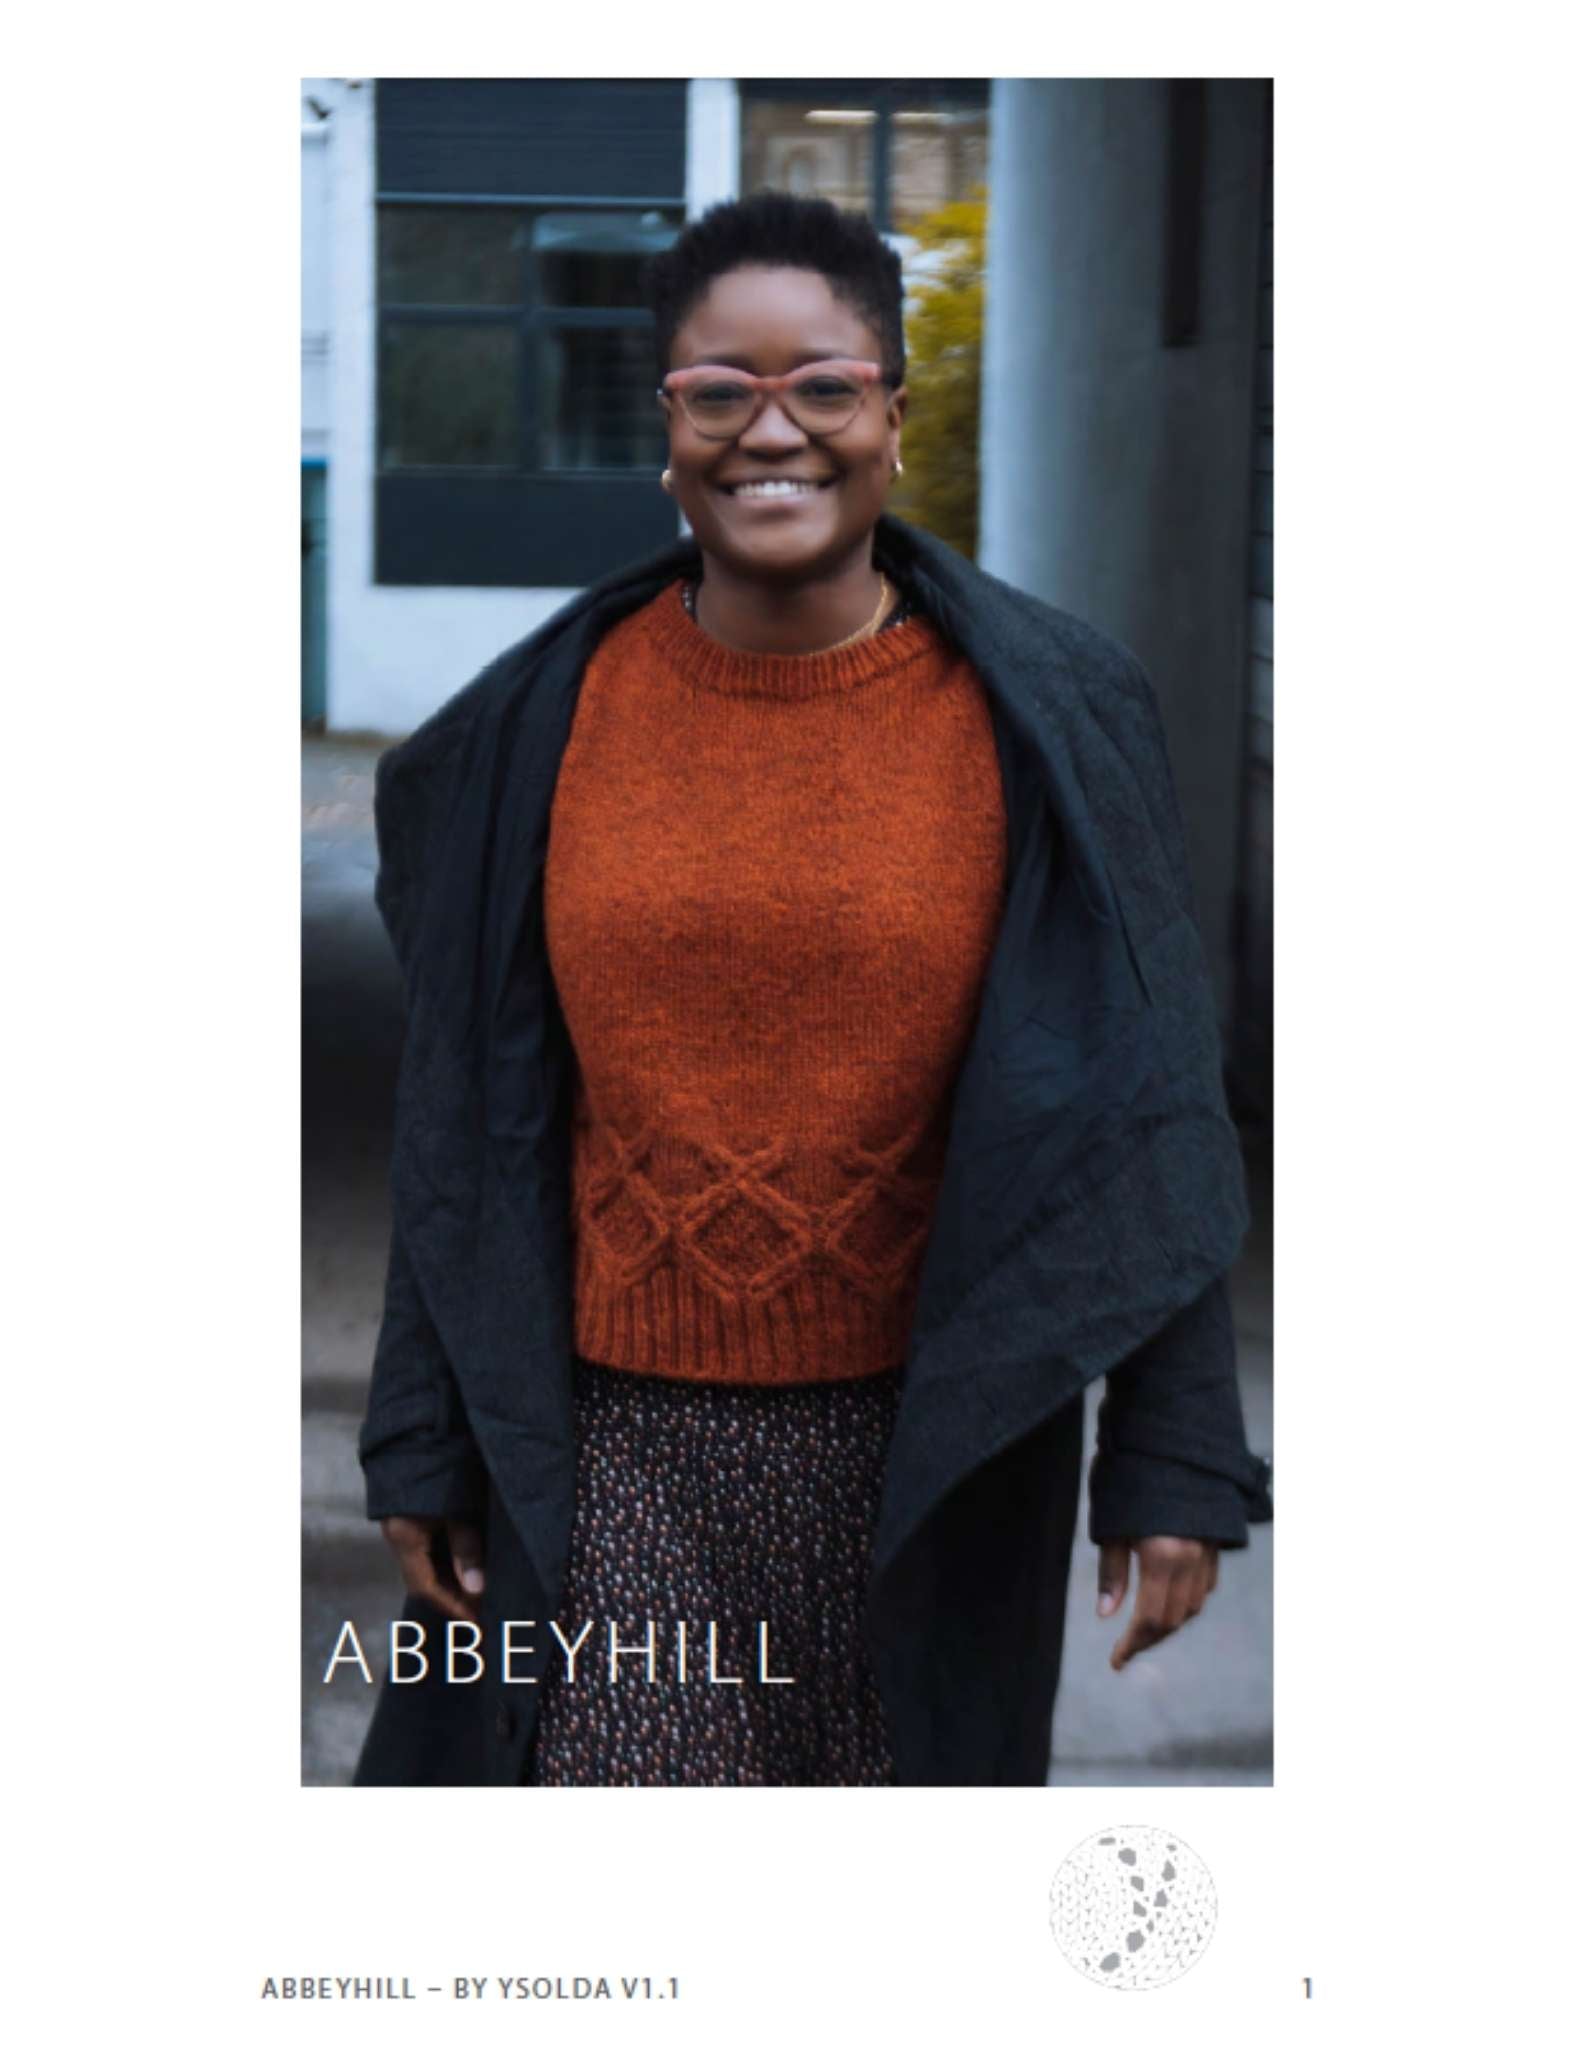 image of a black woman wearing an orange sweater and open, dark jacket. She is walking towards the camera and smiling.